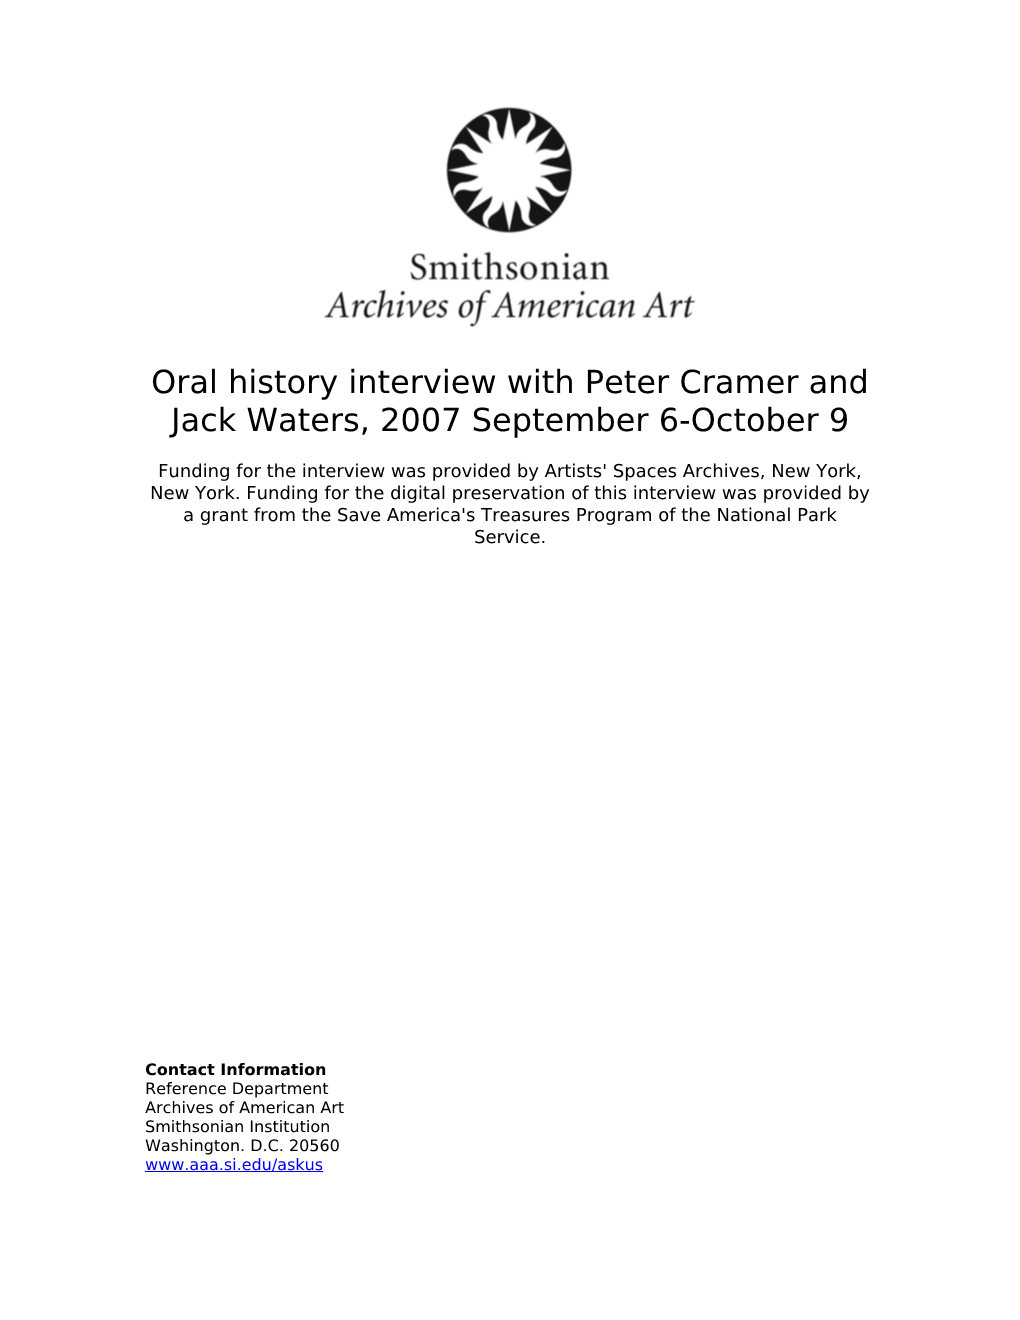 Oral History Interview with Peter Cramer and Jack Waters, 2007 September 6-October 9